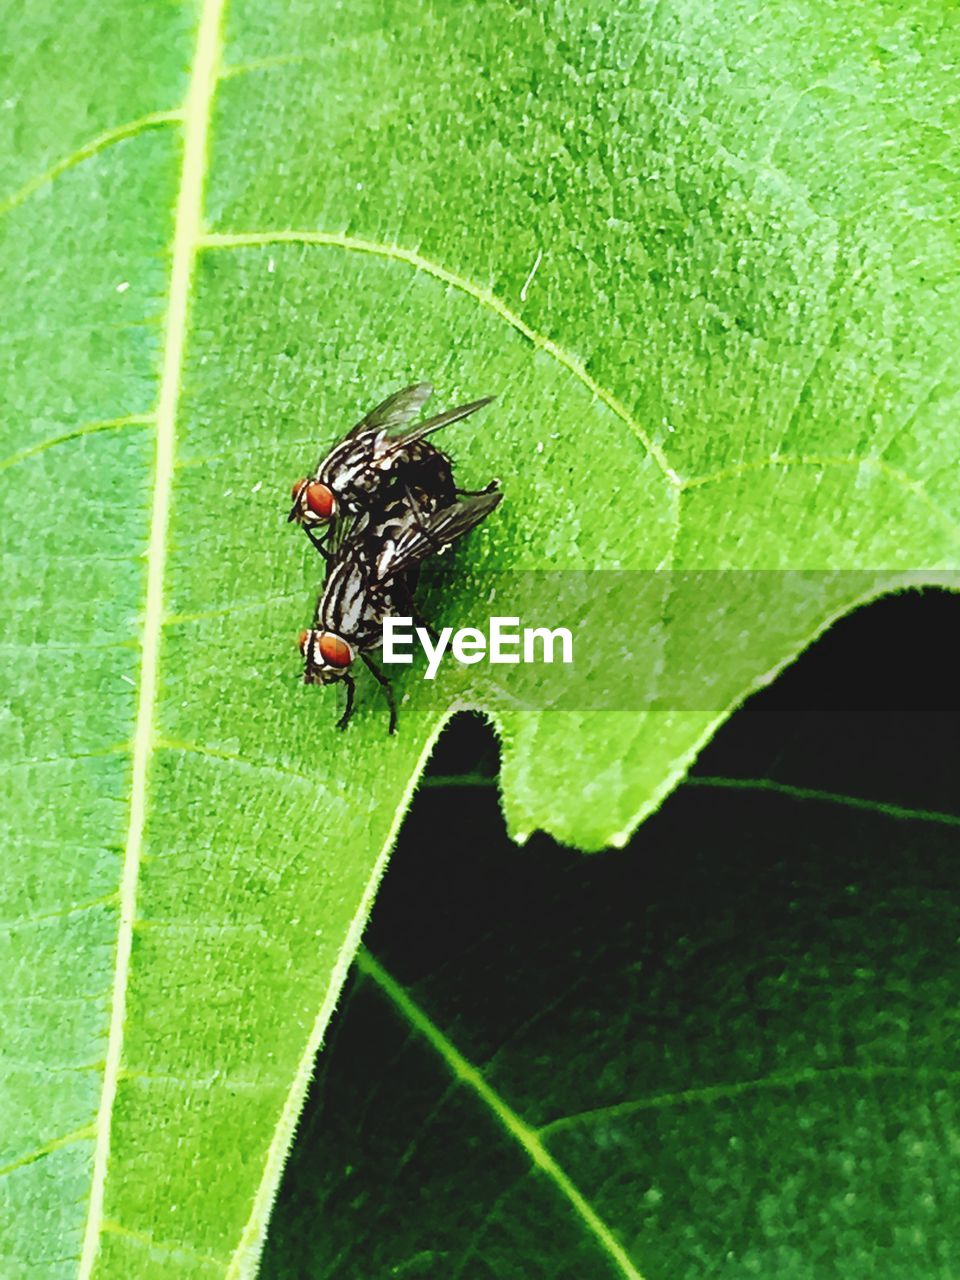 CLOSE-UP OF HOUSEFLY ON GREEN LEAF